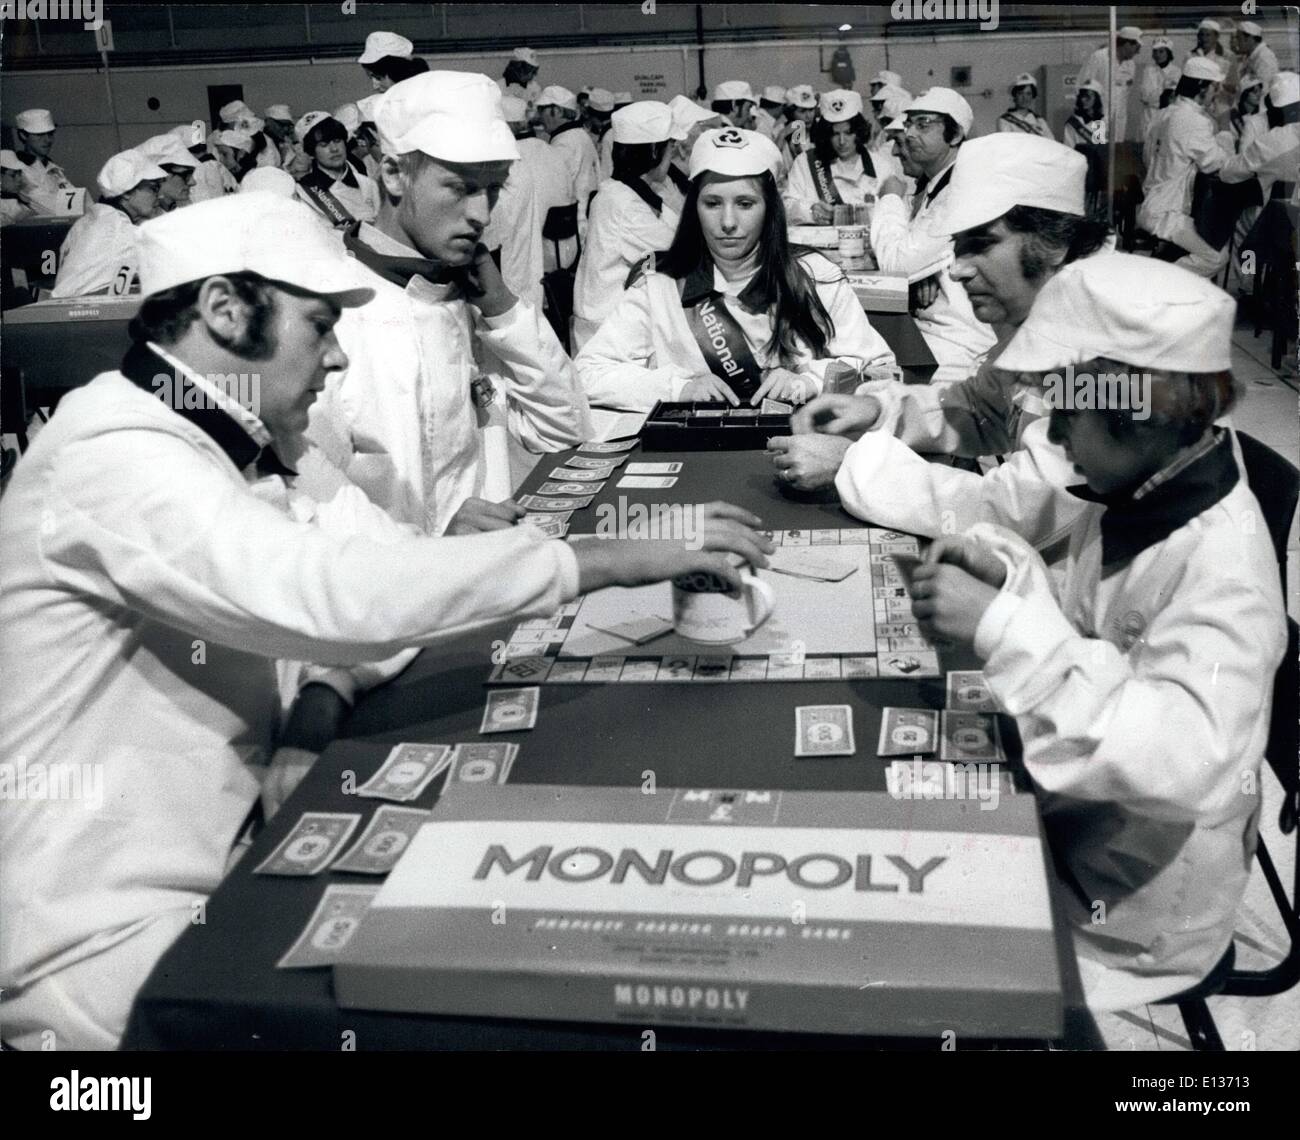 Feb. 28, 2012 - British monopoly championships staged on a nuclear reactor file at Thor burn near Bristol.: The British monopoly championships are being staged on a nuclear reactopile at the Oldury on Savern power station at Thornbury near Bristol. Nearly 150 men, women and children through out Britain are taking part. Each competitor were wearing protective clothing while on the pile, and after leaving the reactor they all go through the decontamination wash Stock Photo